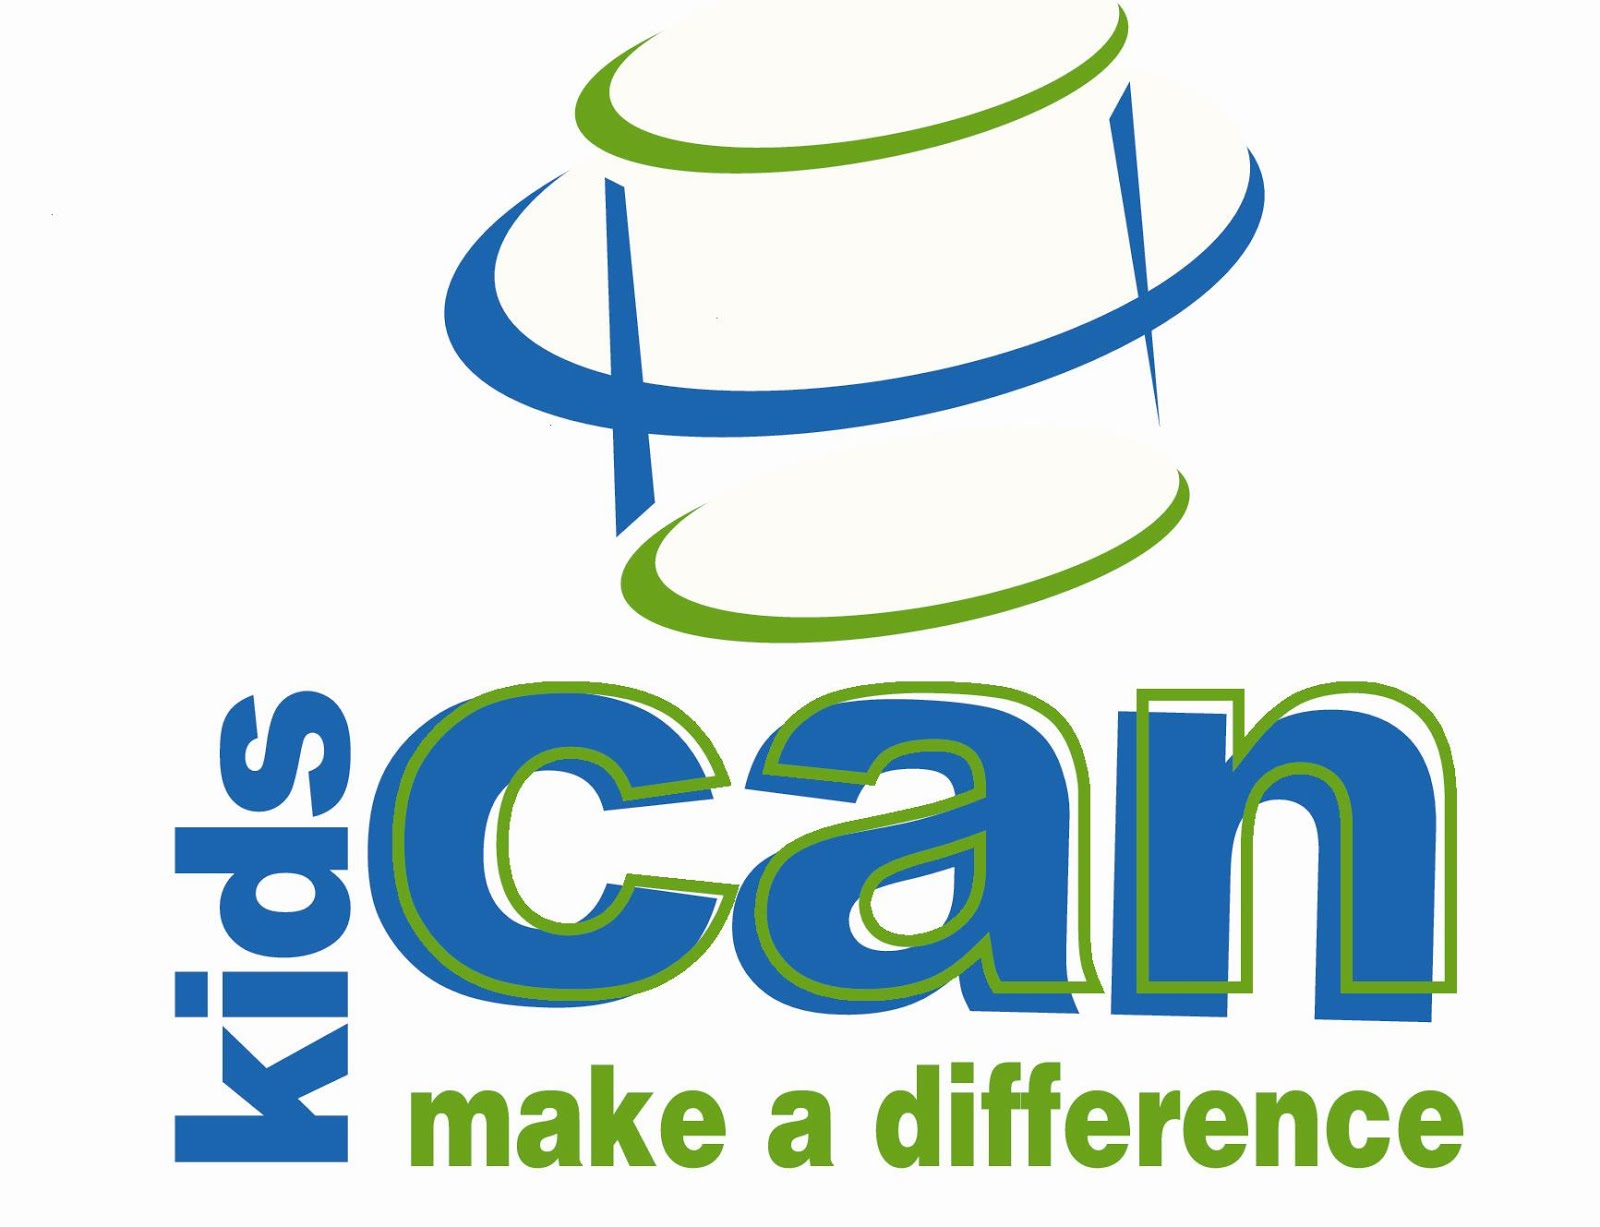 "KIDS CAN make a difference"